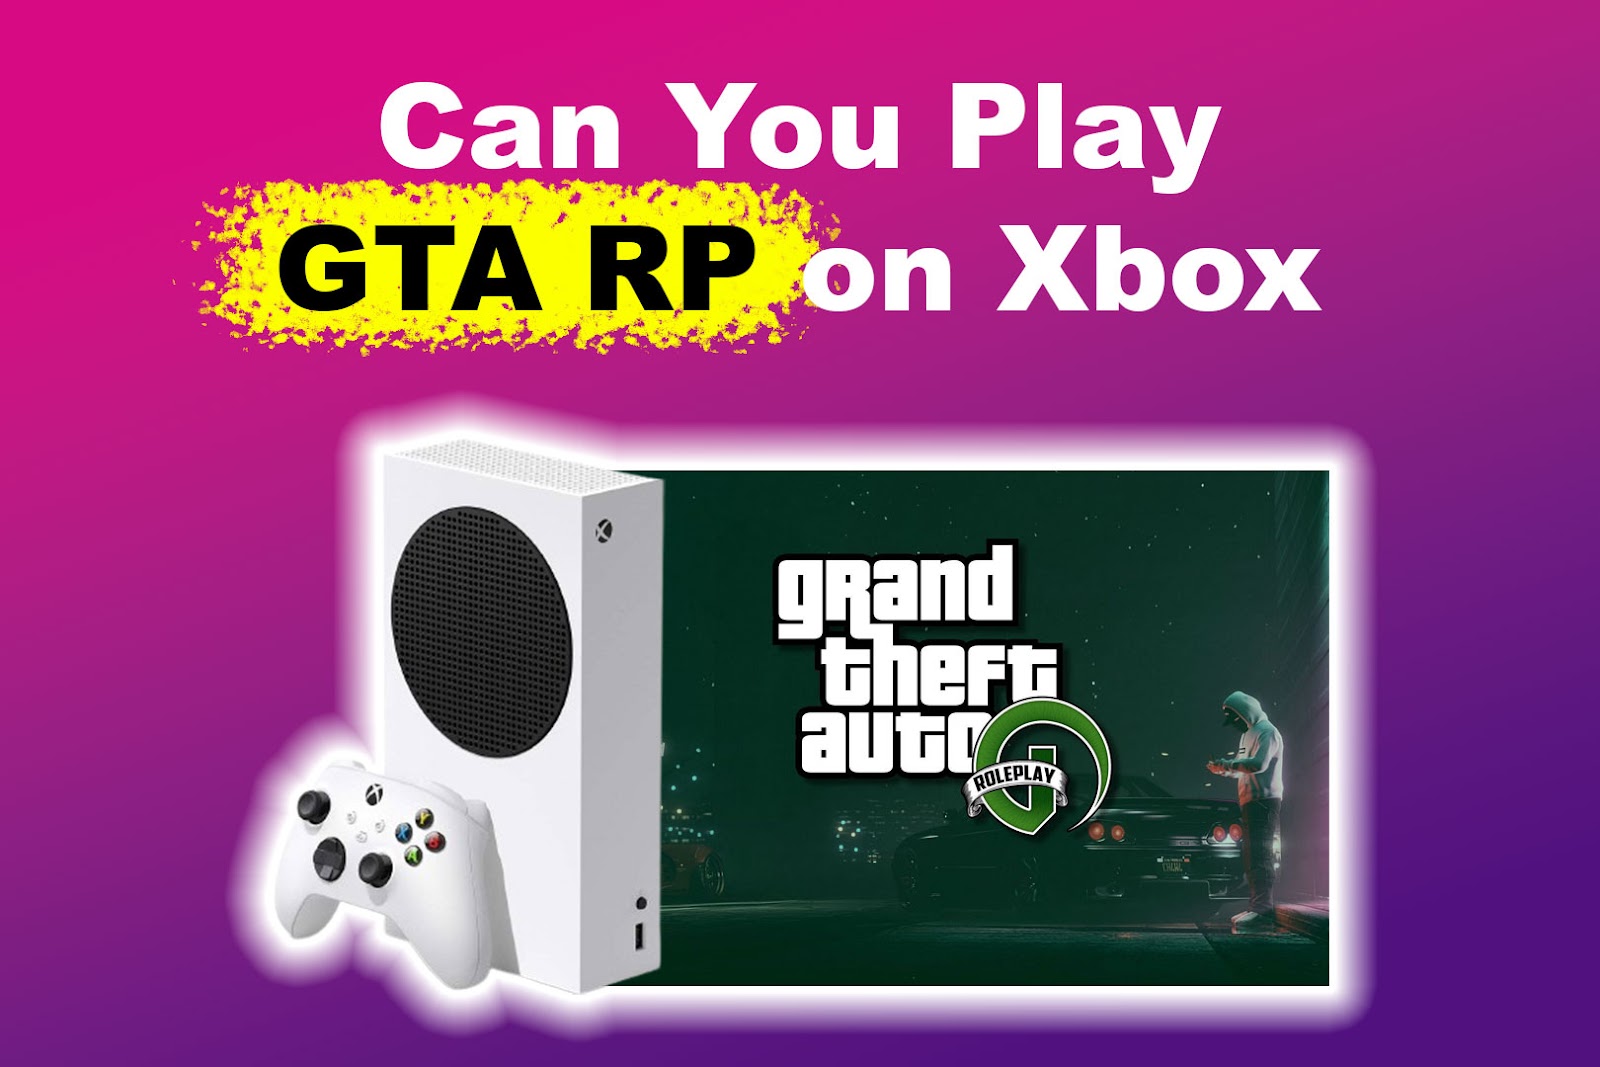 Can You Play GTA RP on Xbox? [Yes! Find Out How to Do It]